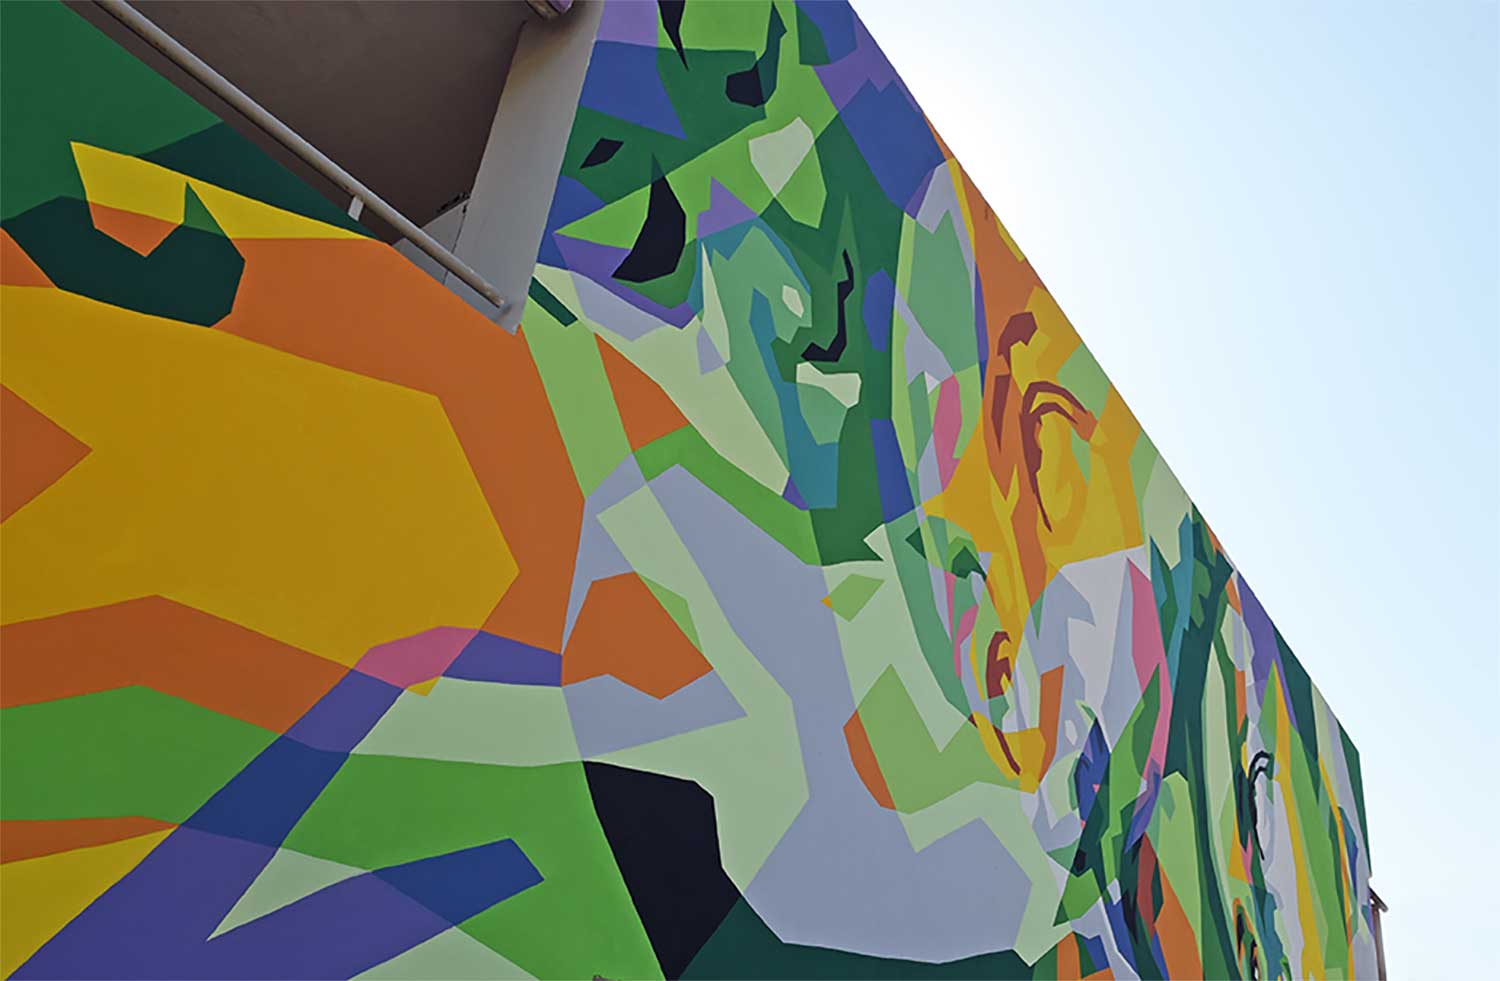 Pollution-eating murals could be a colourful way to clean city air in the future. Image Credit - AM Technology